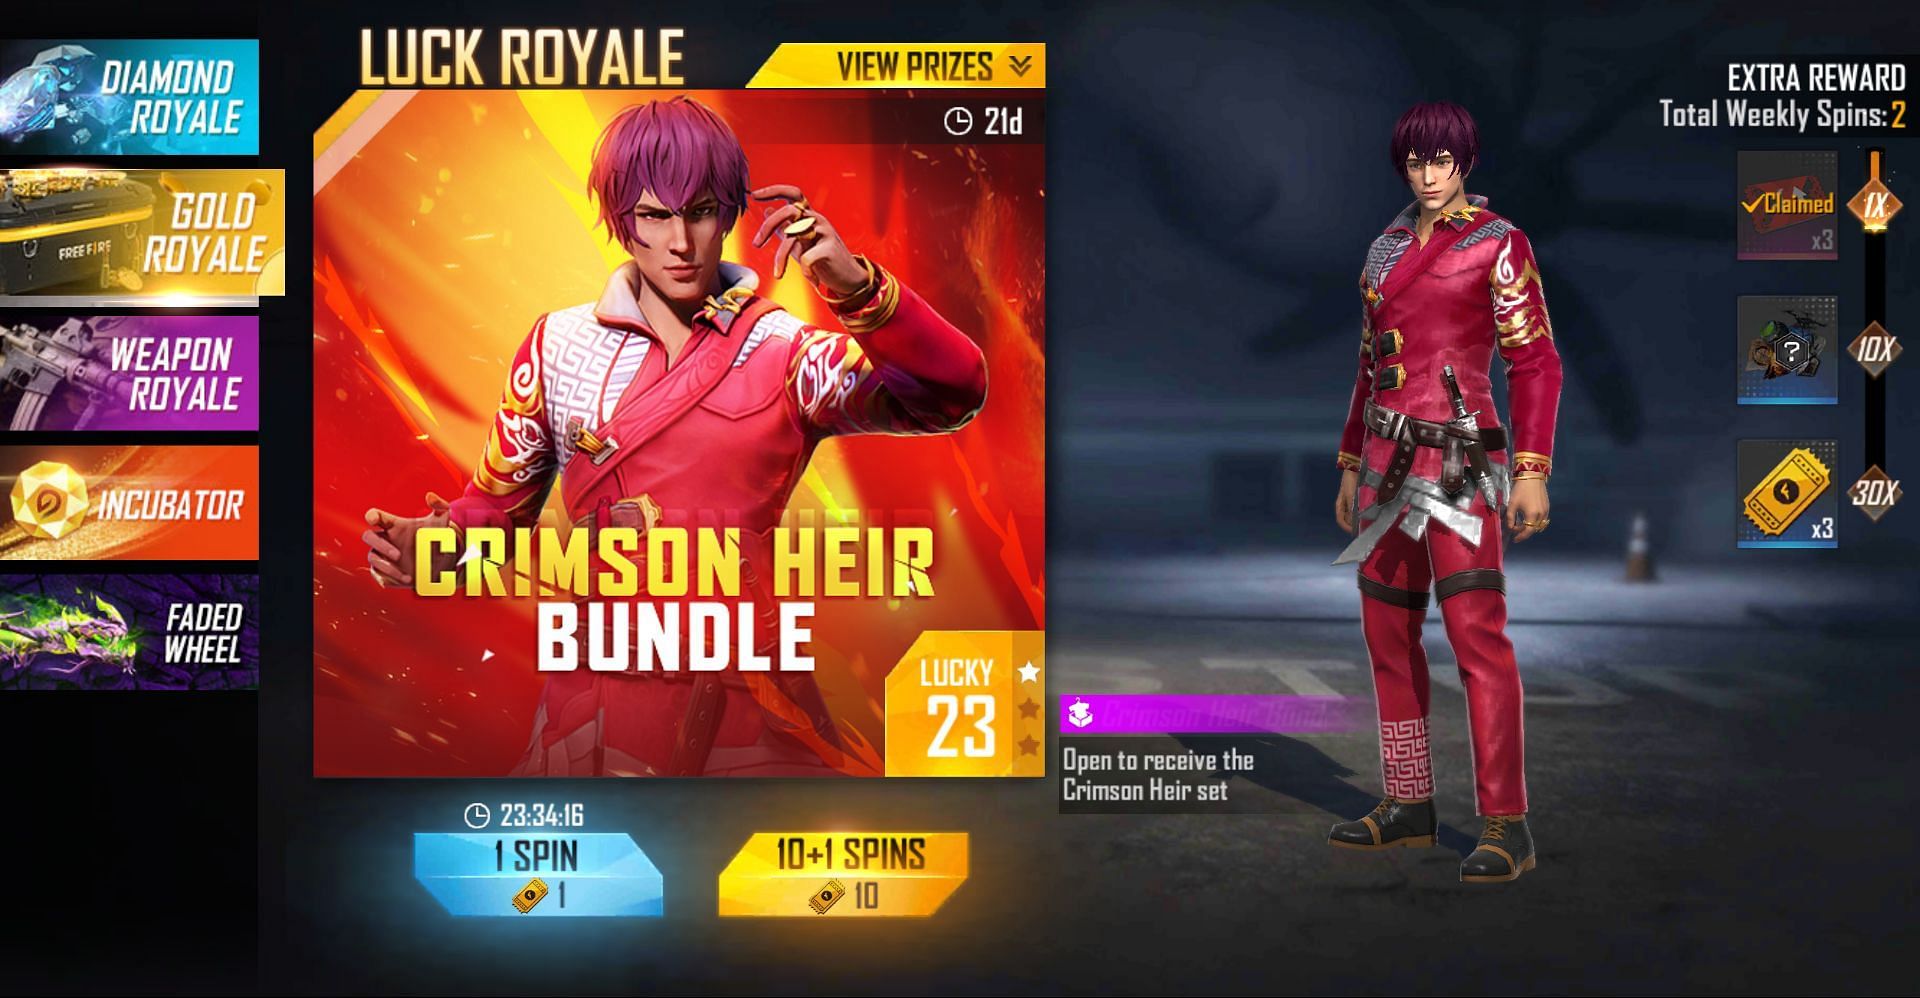 The Gold Royale ends in 21 days, i.e., on 1 December (Image via Free FIre)